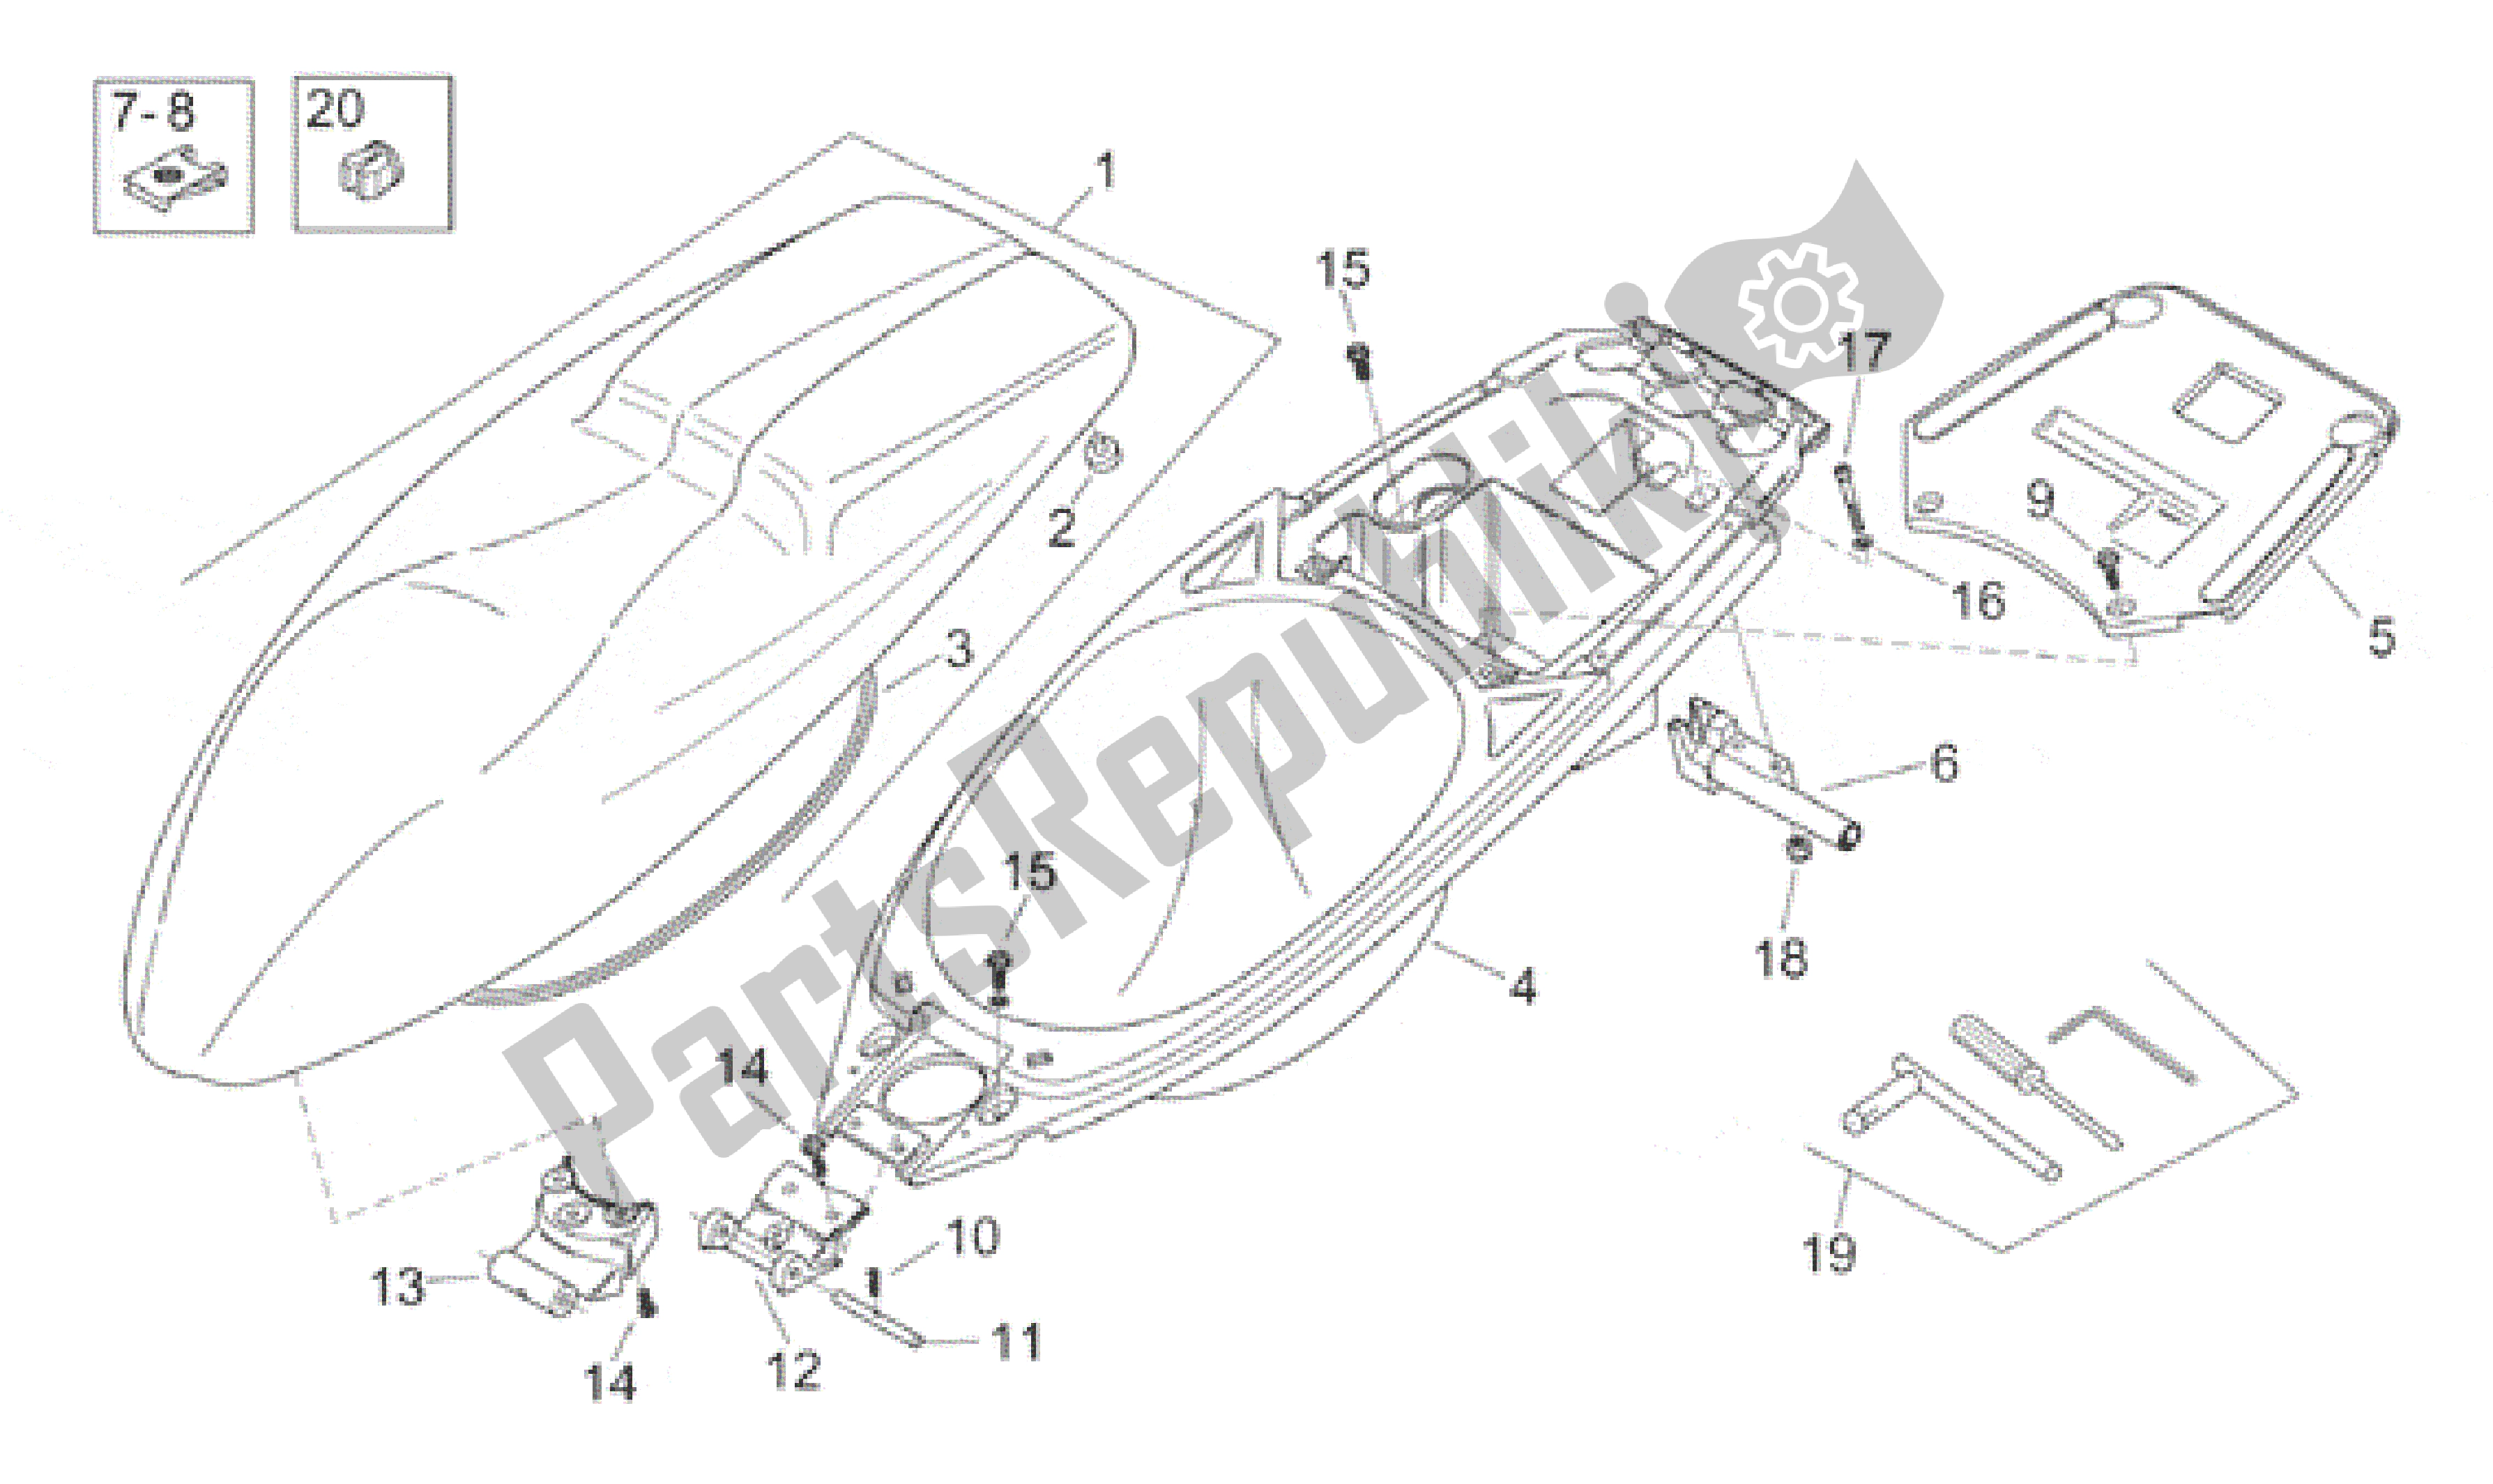 All parts for the Saddle - Helmet Compartment of the Aprilia Area 51 50 1998 - 2000